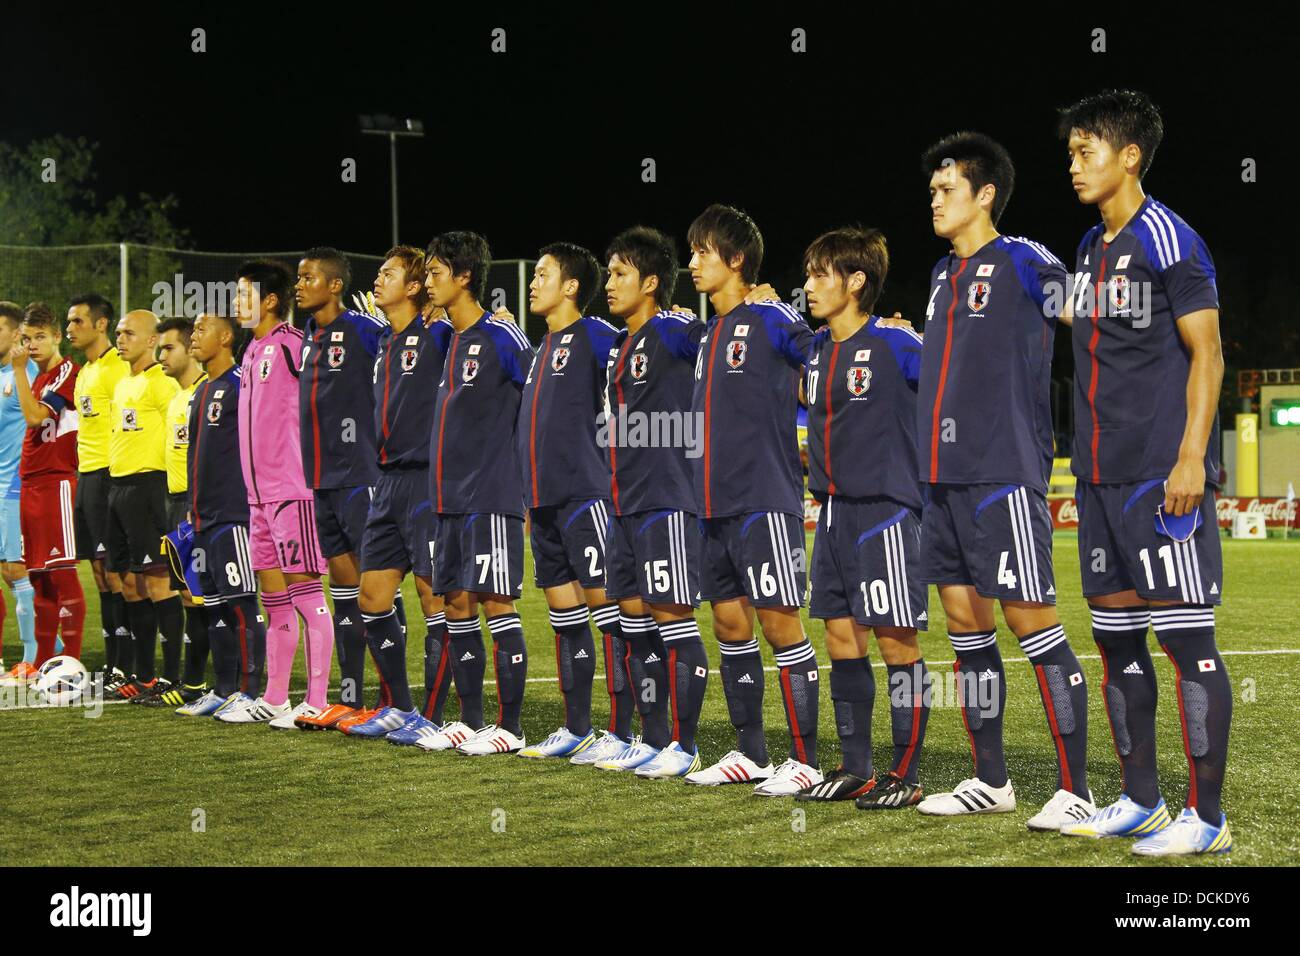 U19 Japan team group line-up, AUGUST 15, 2013 - Football / Soccer : L'Alcudia U20 International soccer tournament match between U19 Belarus and U19 Japan, at the Estadio Municipal Els Arcs in L'Alcudia, Spain, August 15, 2013. (Photo by AFLO) Stock Photo